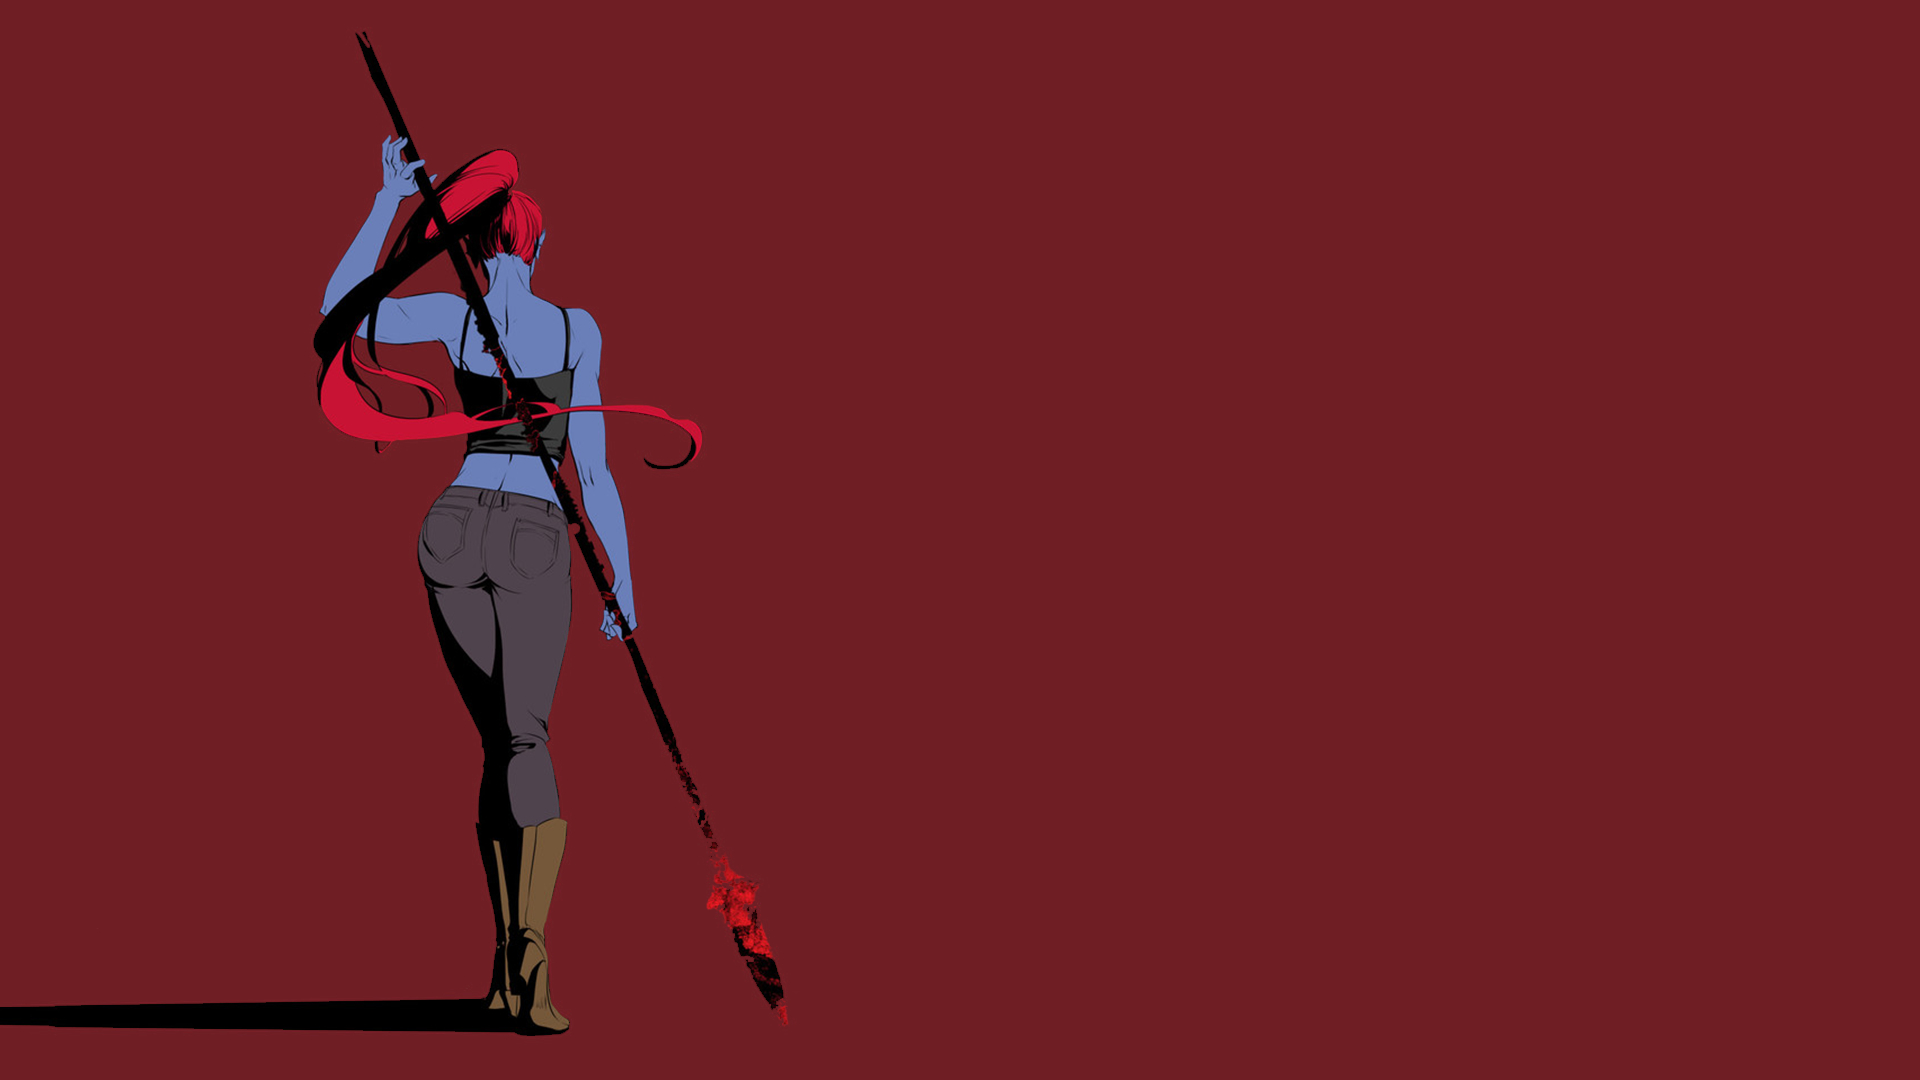 1920x1080 Wallpaper : Undertale, Undyne, simple background, video games, red background persepaavo 1384789 HD Wallpapers